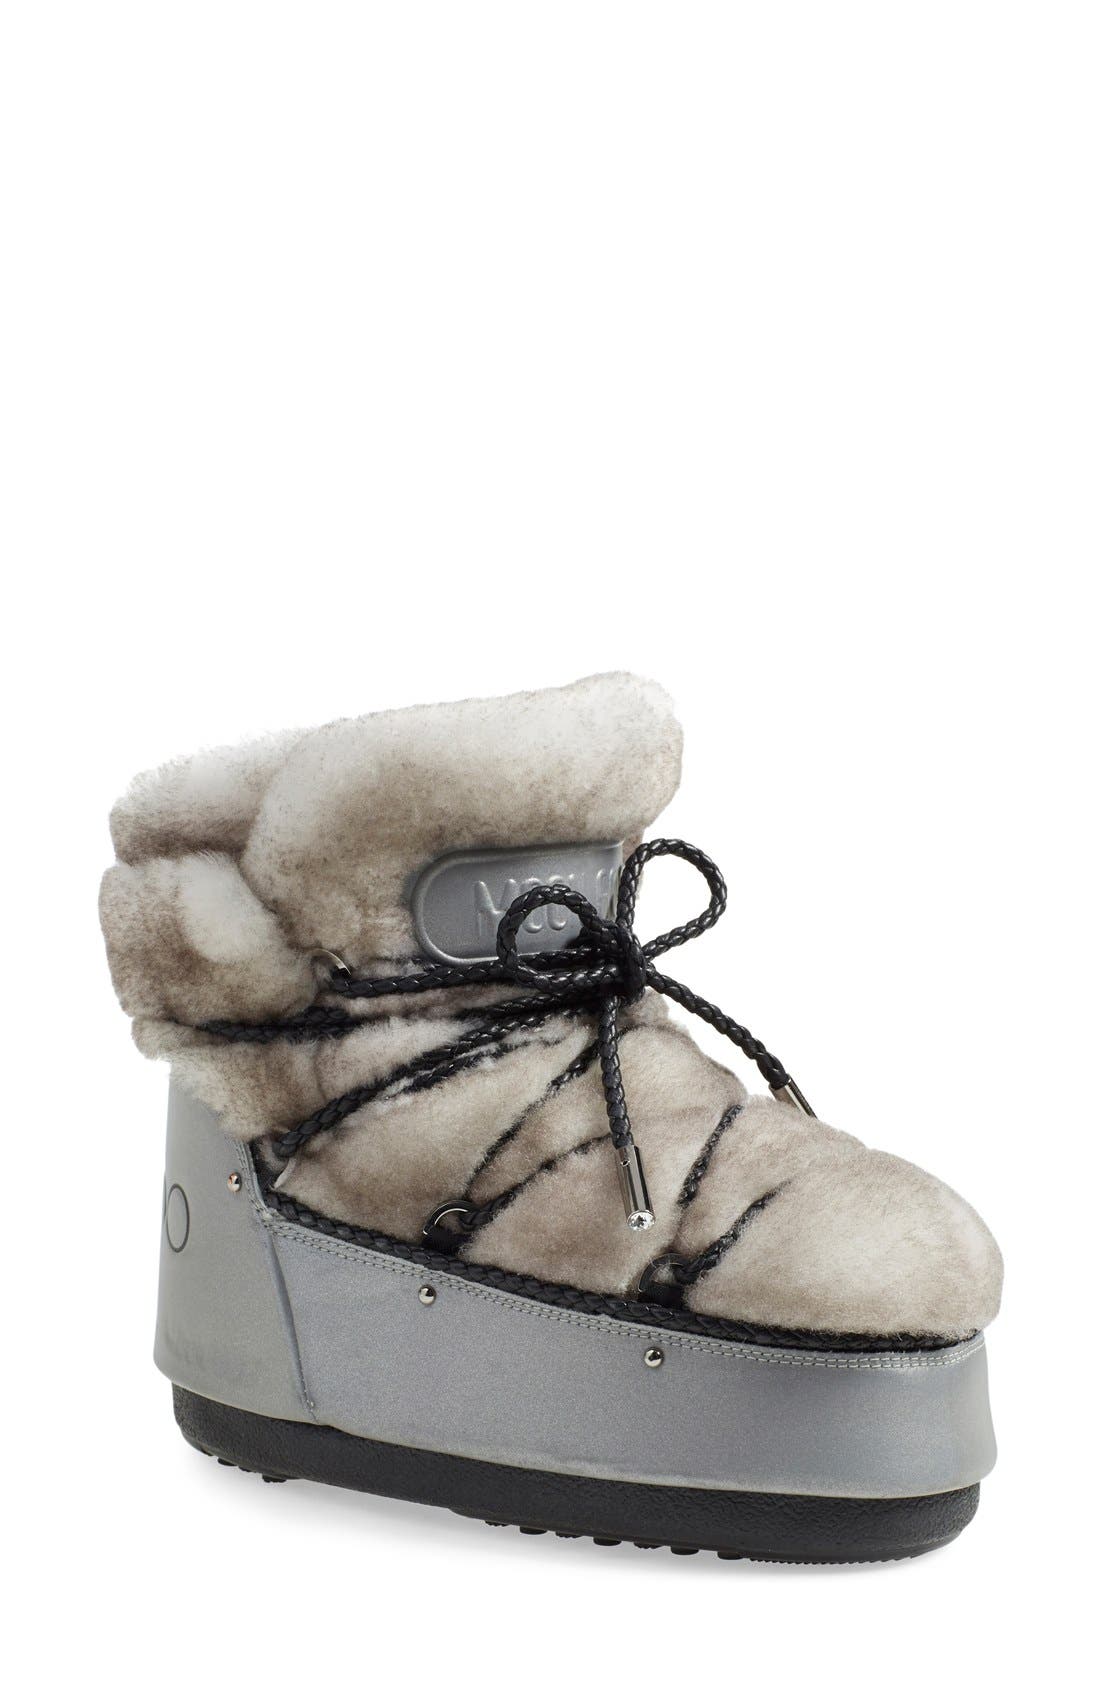 burberry moon boots